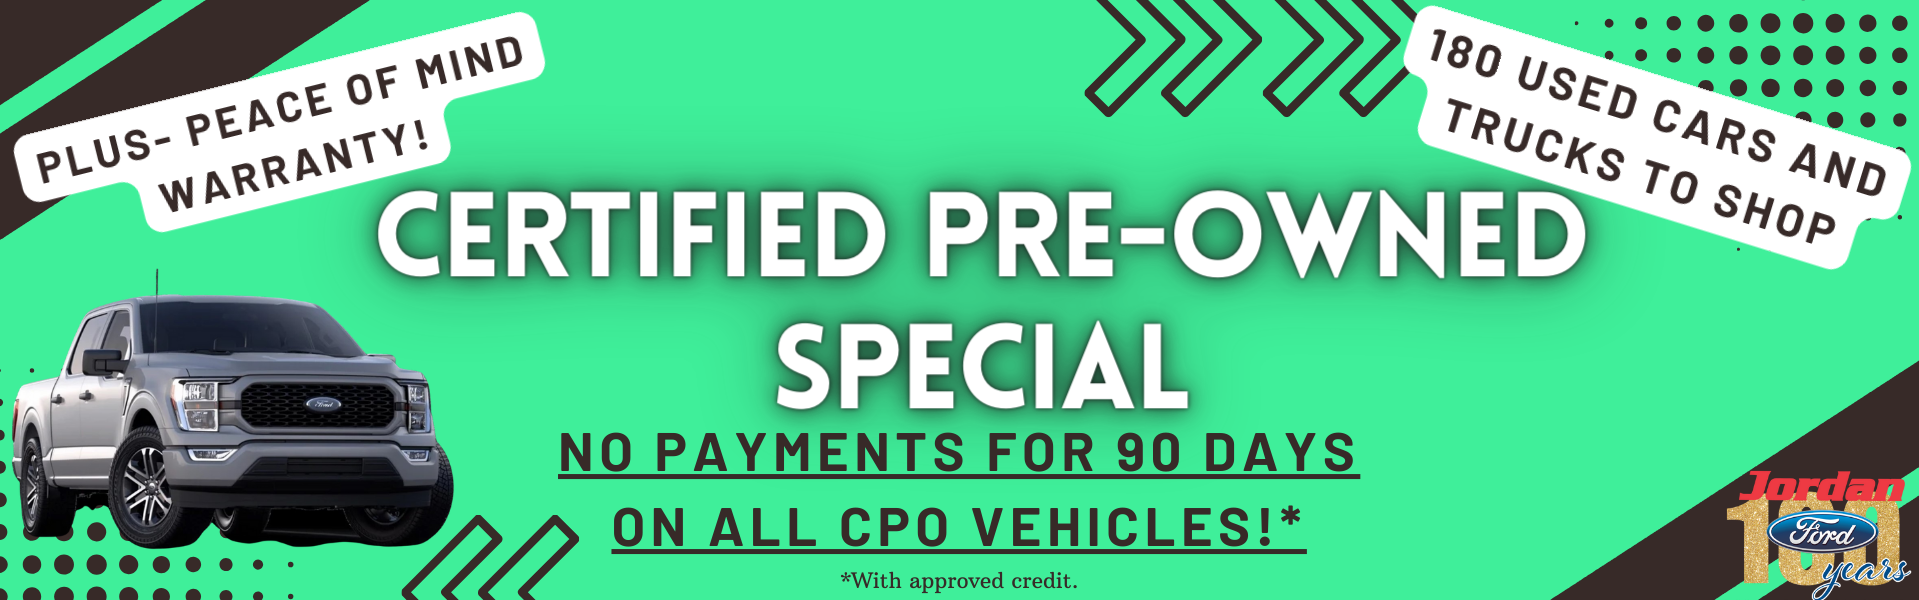 certified pre-owned special- no payments for 90 days